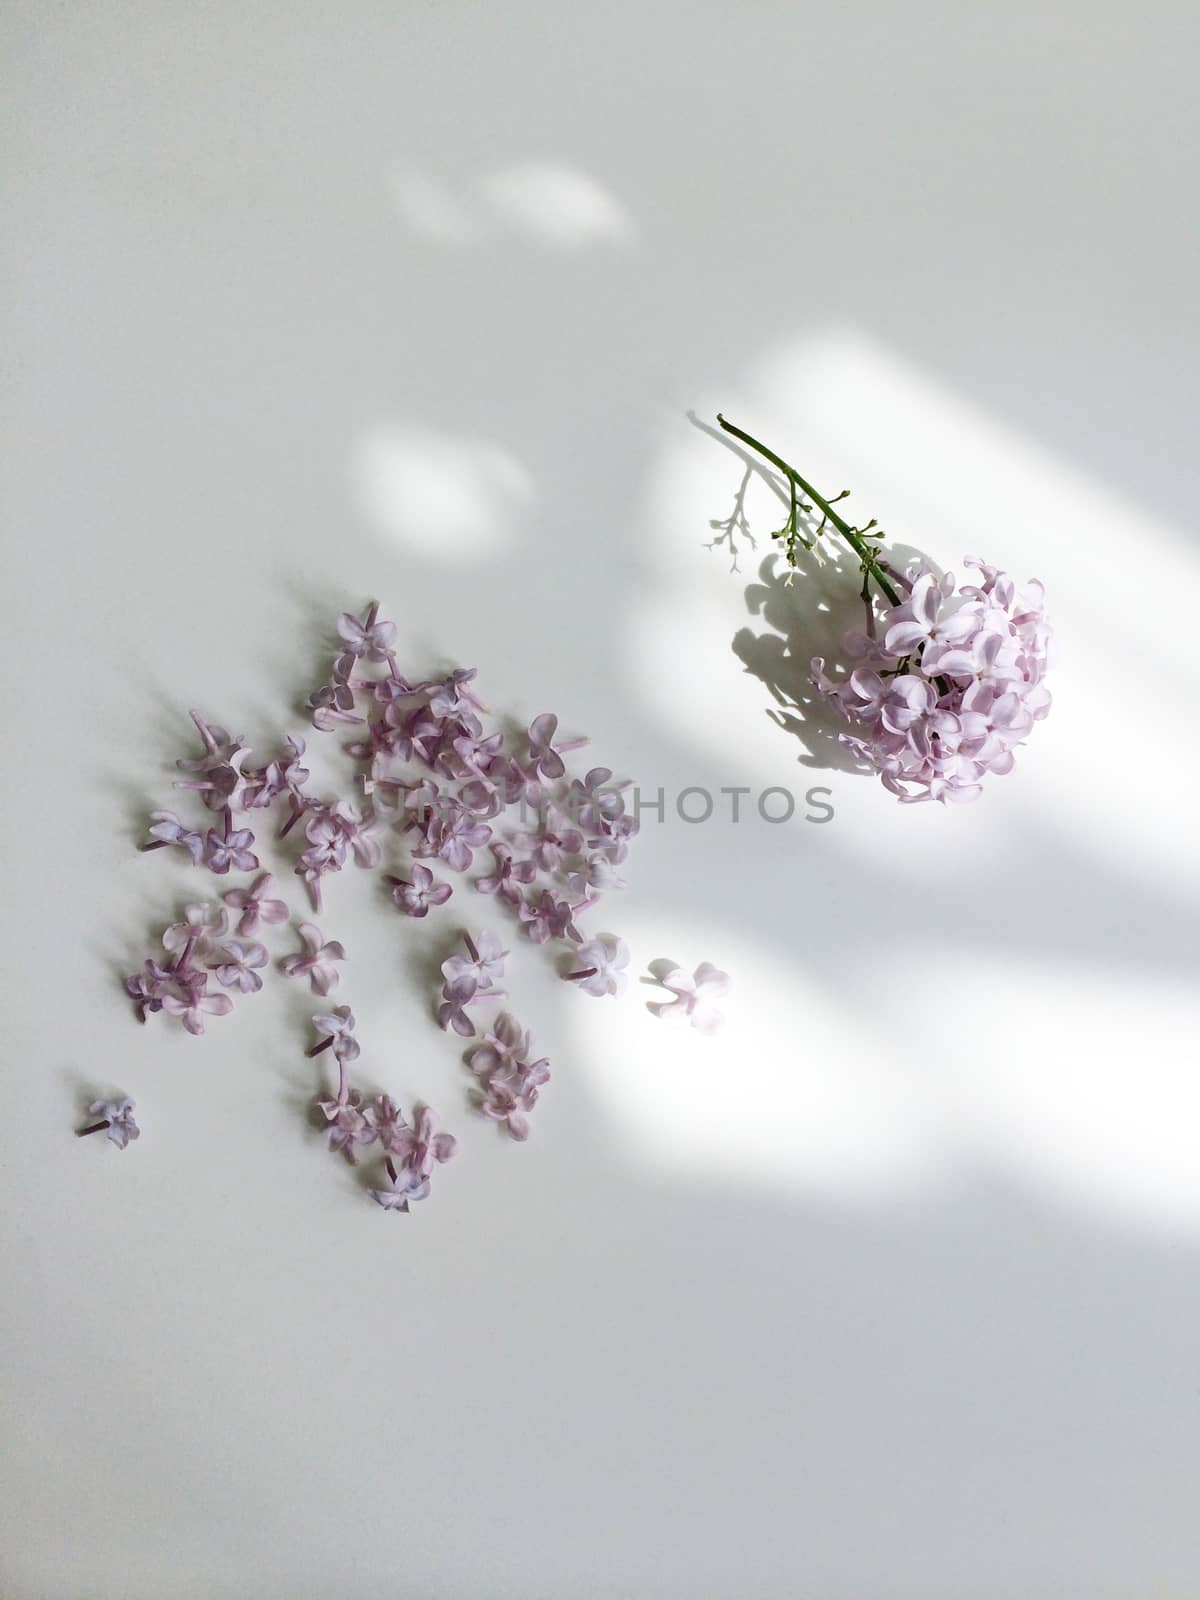 Picked lilac flowers scattered on a white background